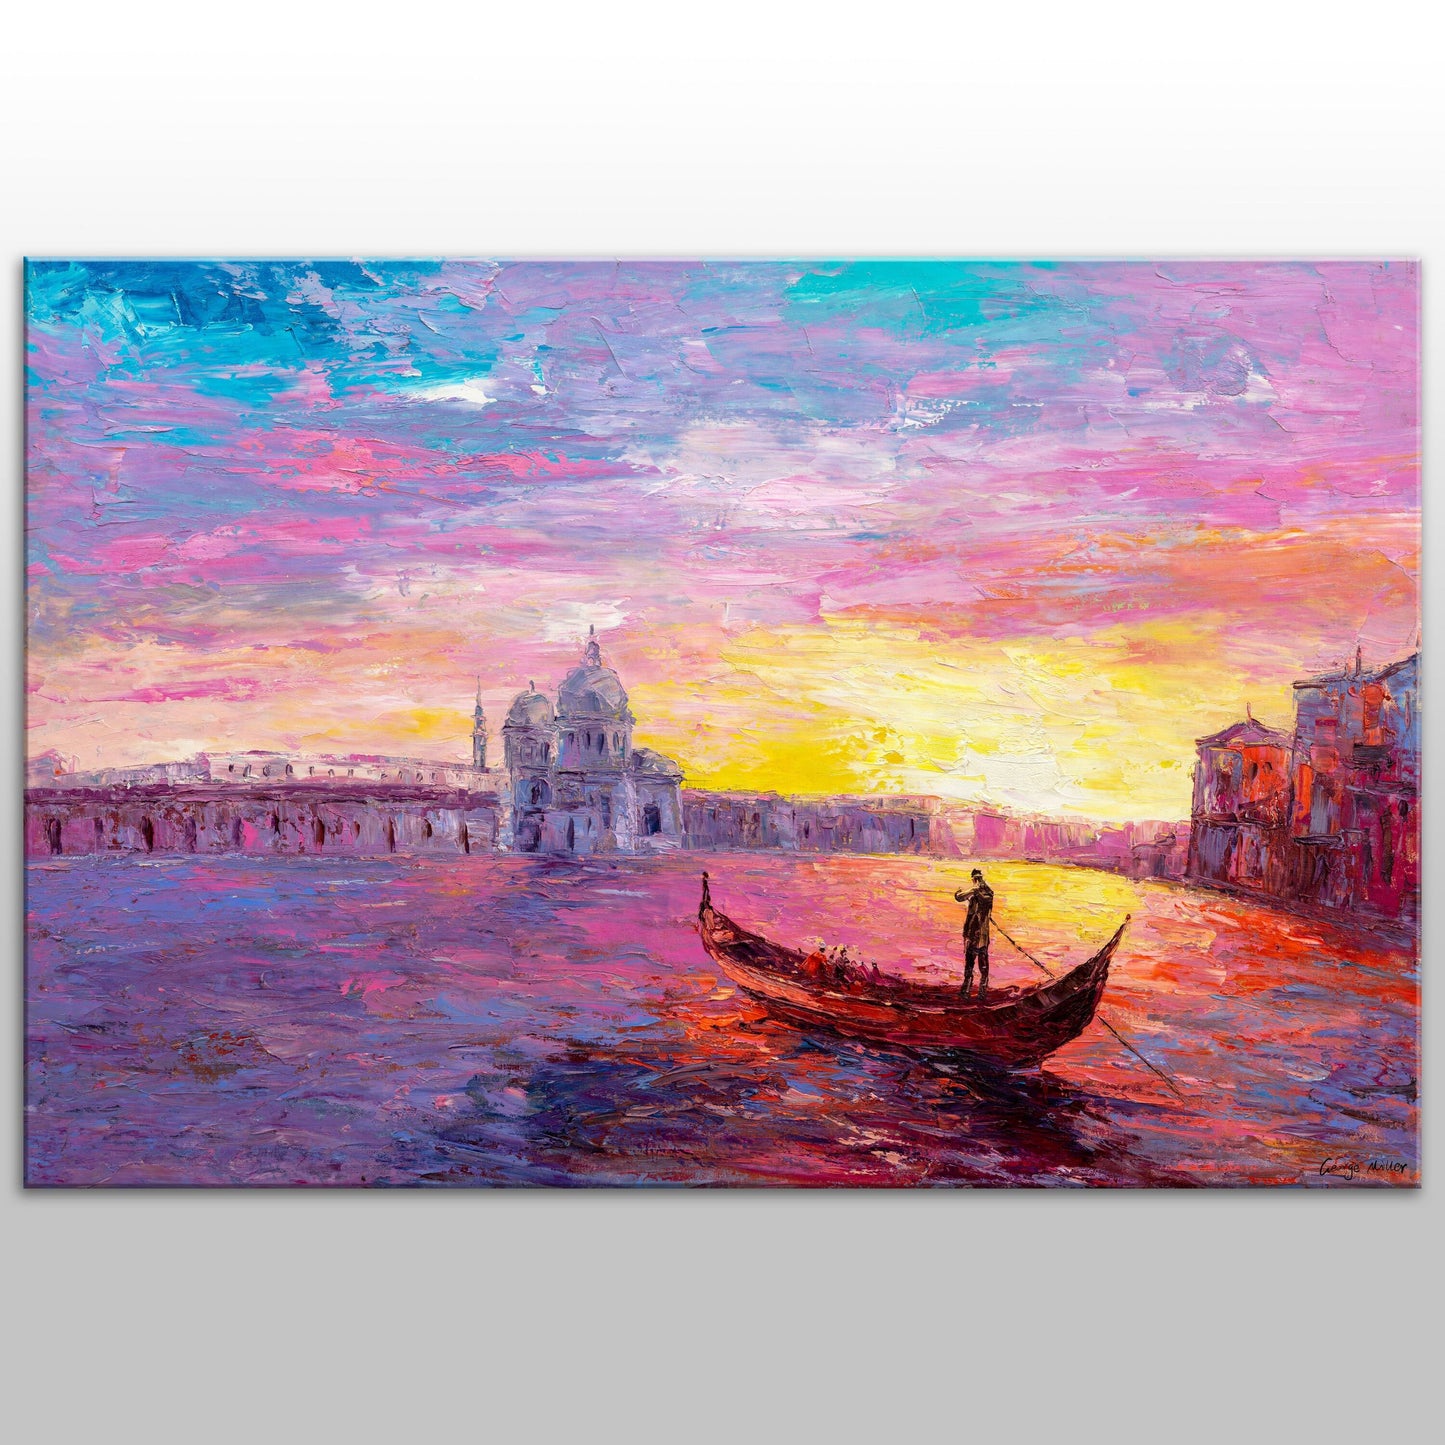 Venice Oil Painting, Palette Knife Oil Painting, Canvas Art, Large Oil Painting, Contemporary Art, Wall Hanging, Landscape Painting, Large